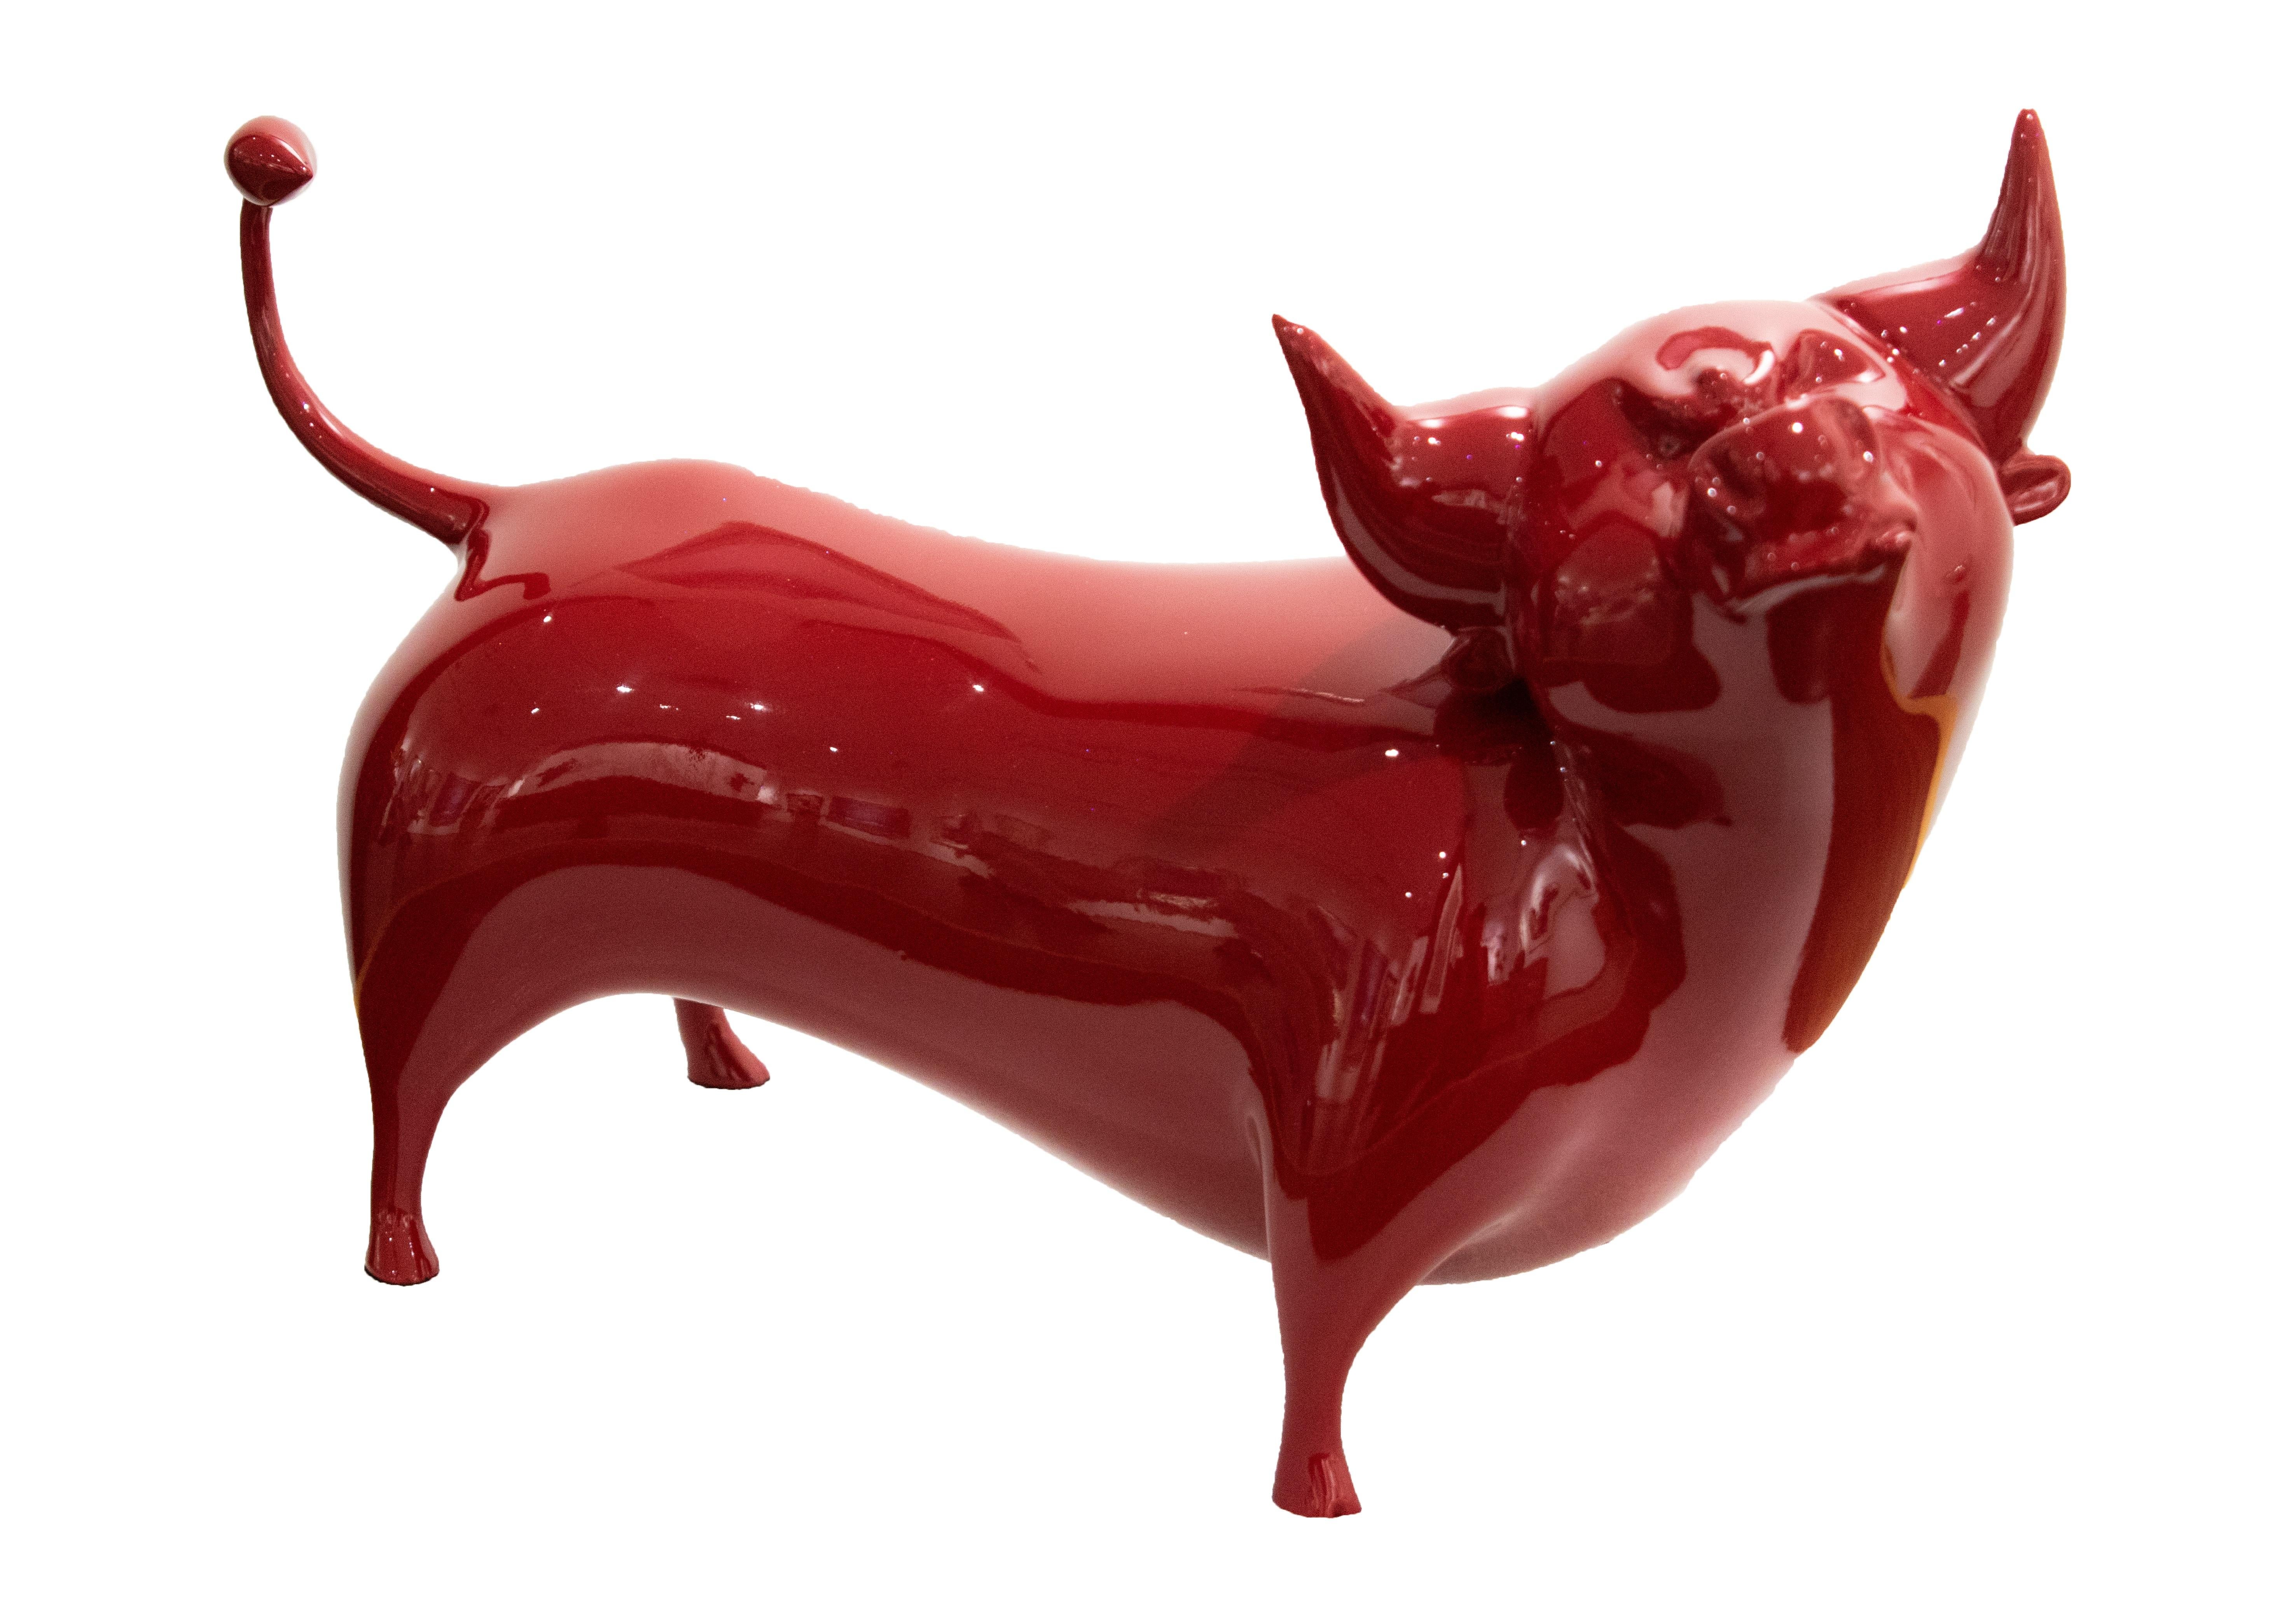 Zou Liang Figurative Sculpture - Chinese Zodiac Bull Sculpture in Majestic Red. Limited edition. Ship Fast.